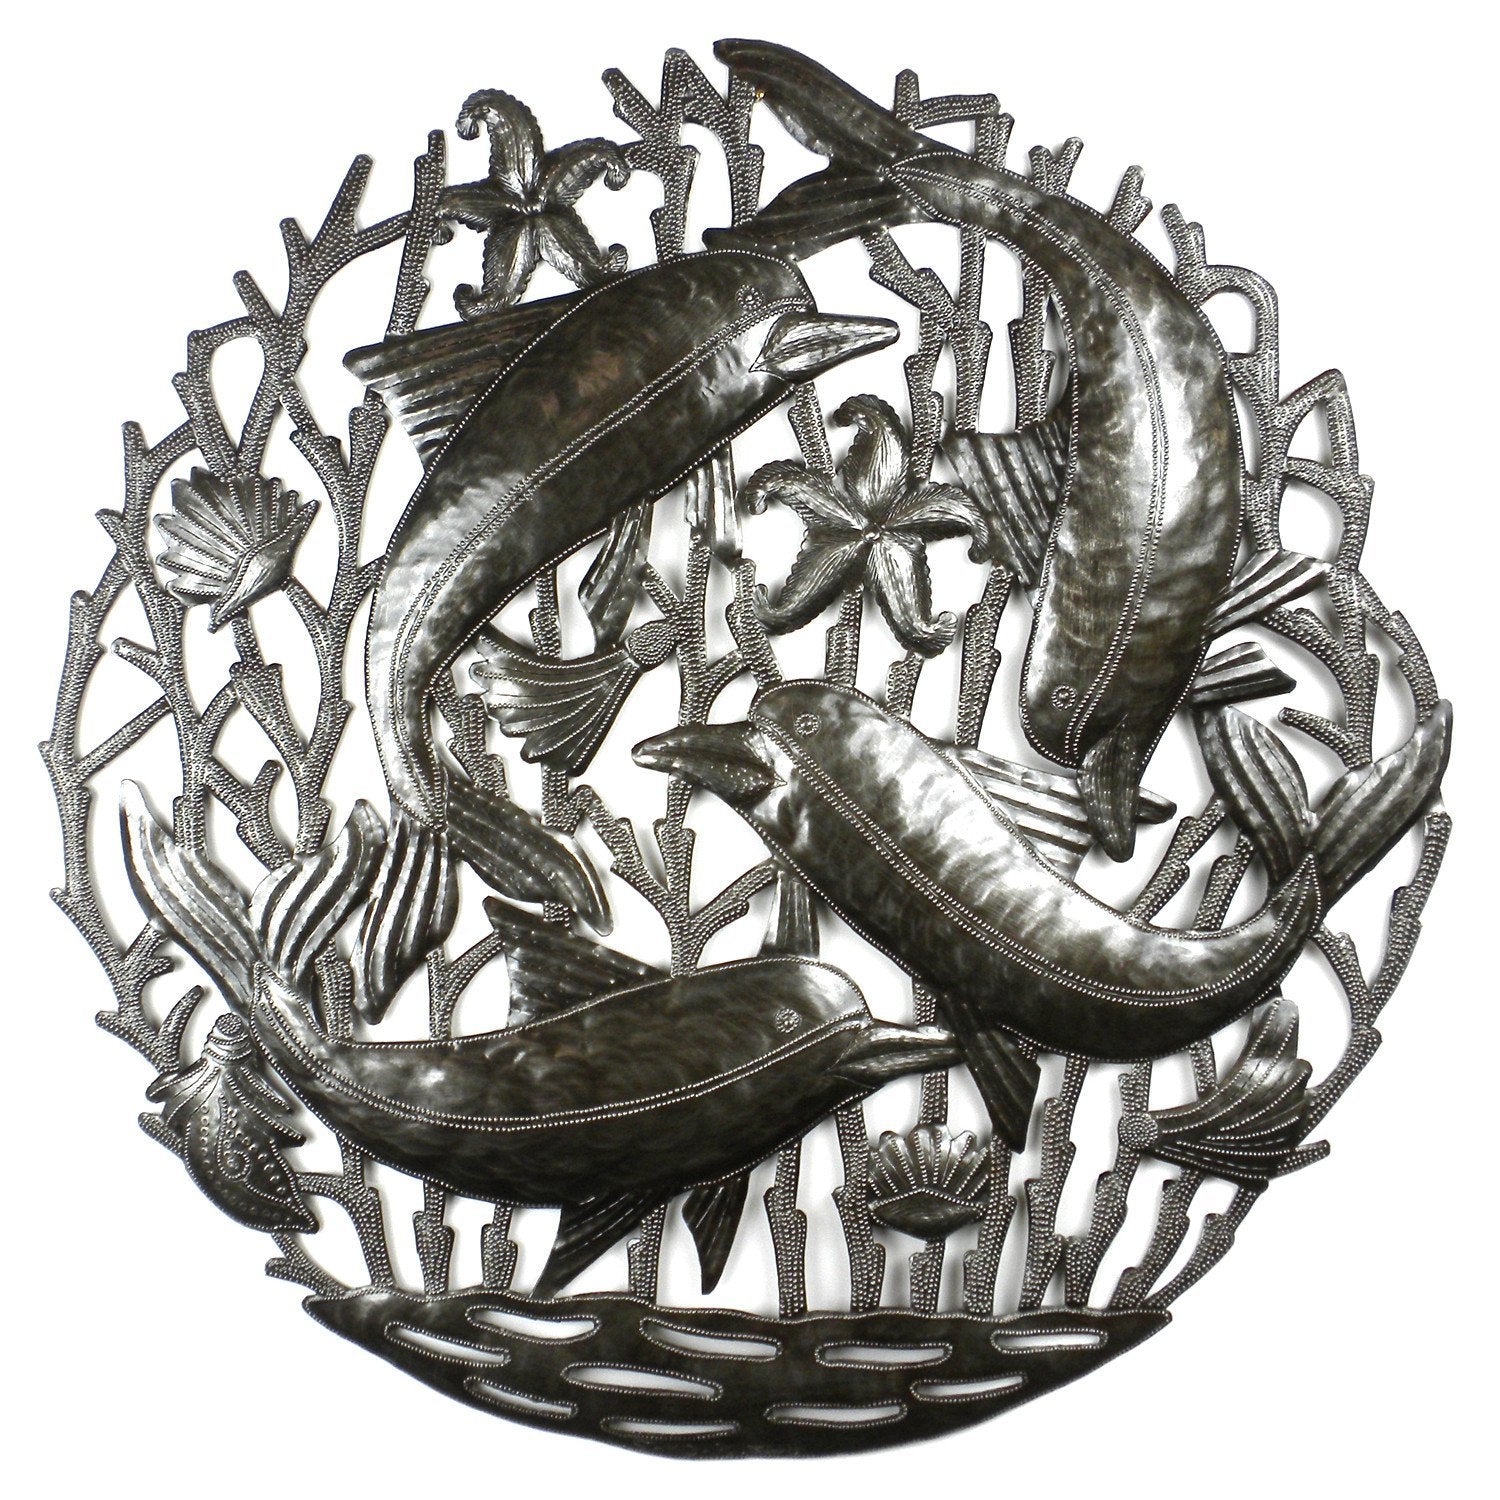 Pod of Dolphins Metal Wall Art - Croix des Bouquets - Linda Kay Gifford’s - Those Nasty Women TALK! by SWEETSurvivor